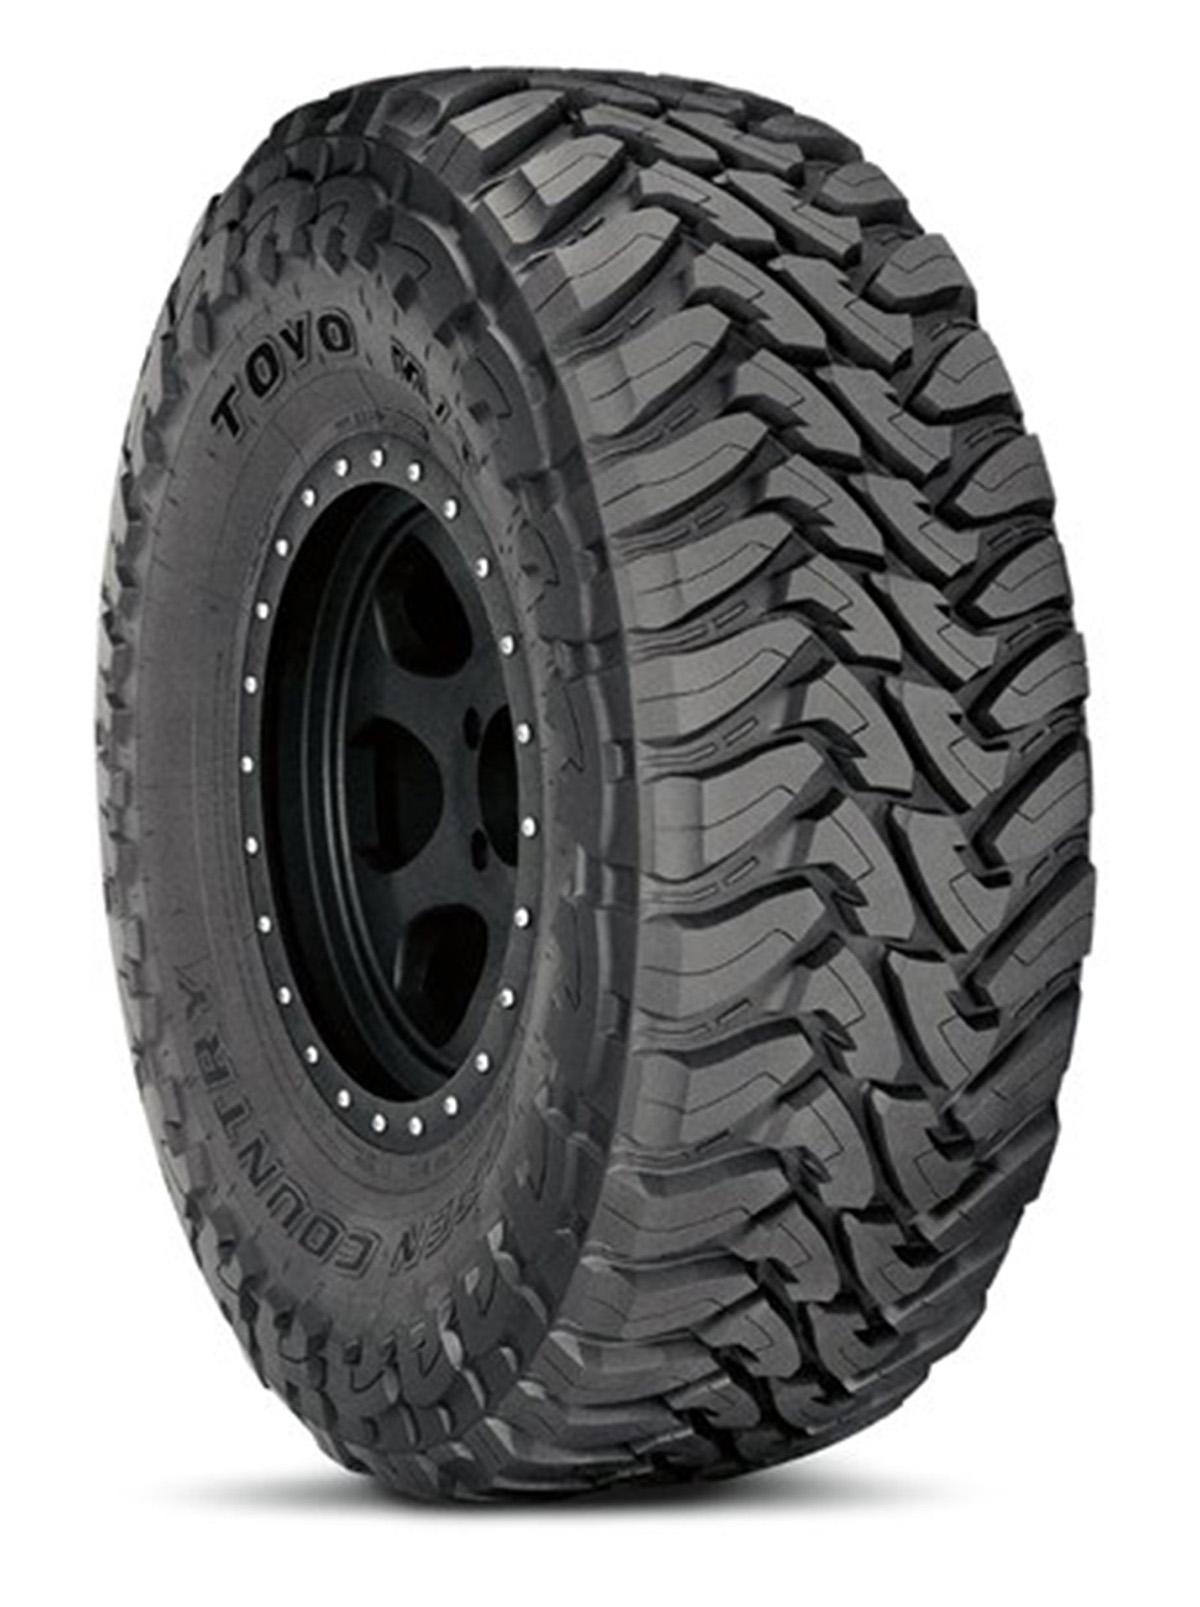 Toyo - OPEN COUNTRY MT  NW  250/25R20